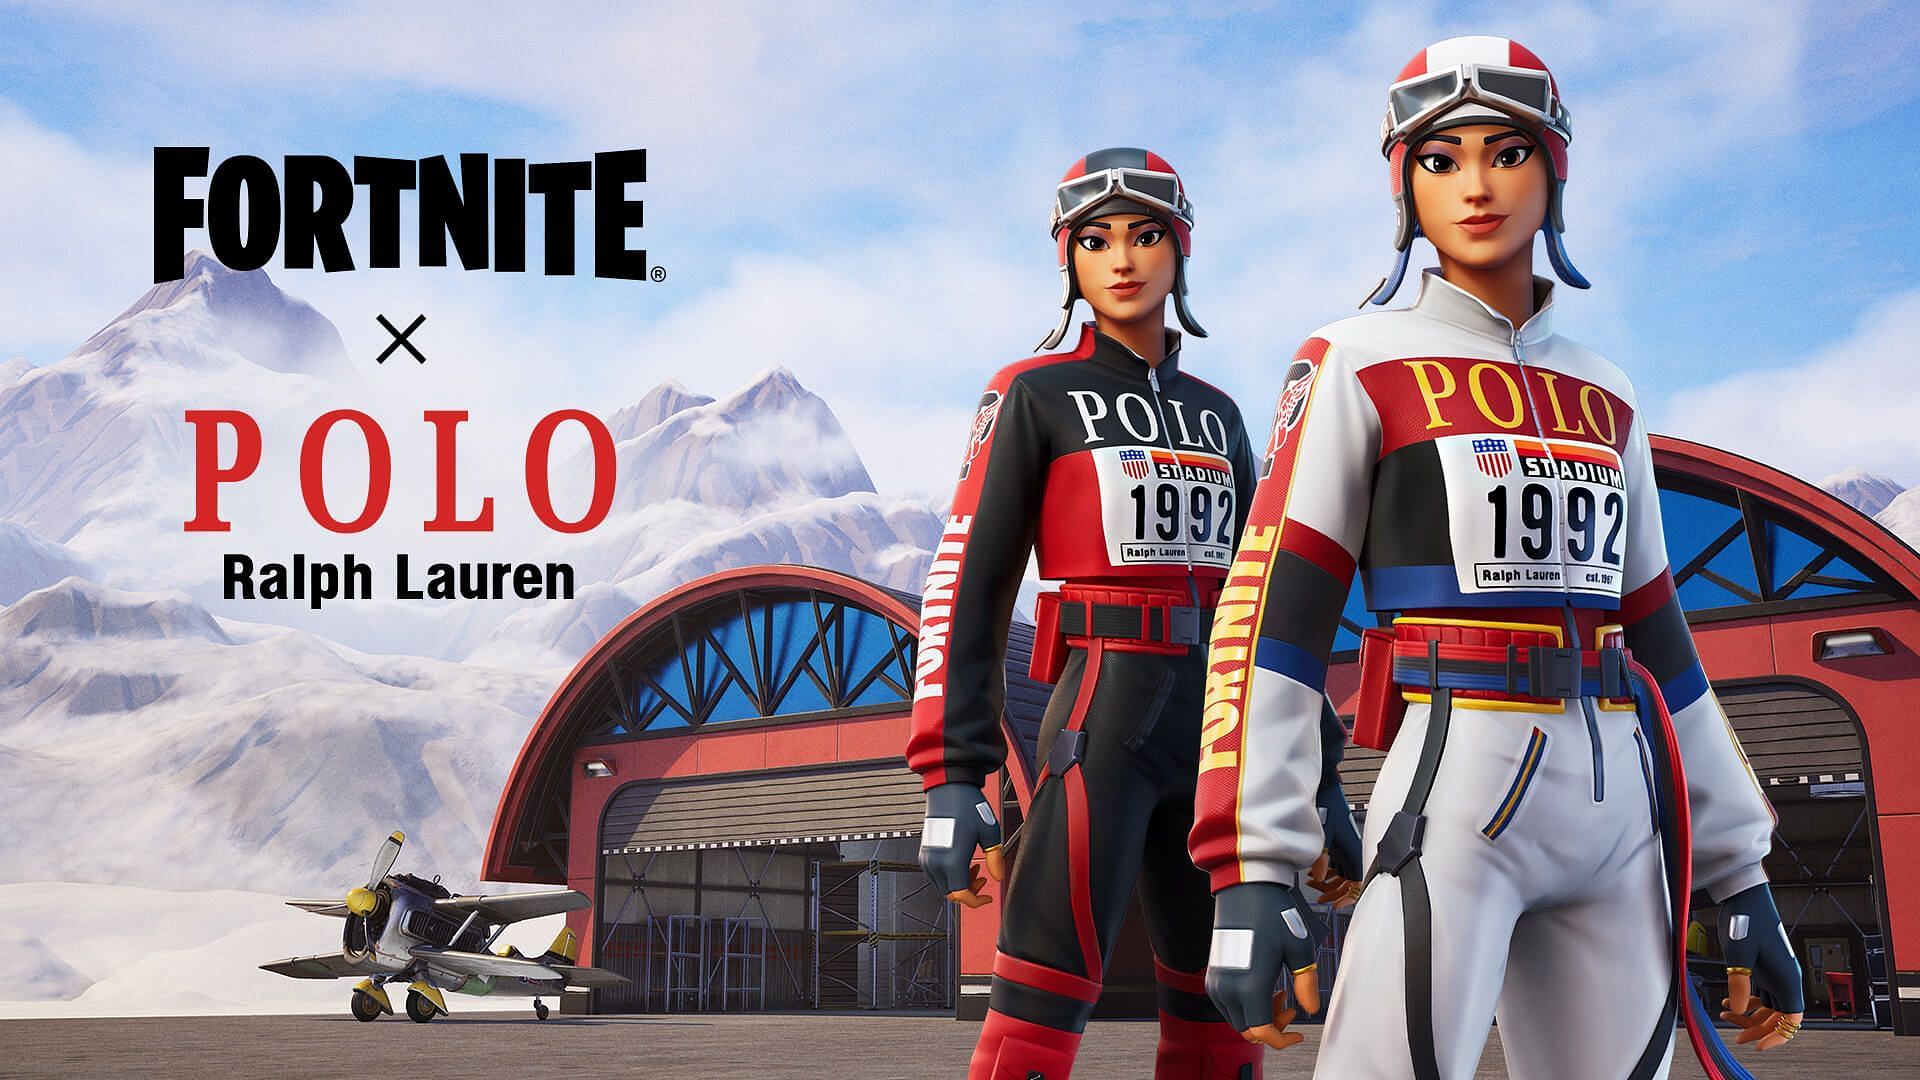 Epic Games provided free V-Bucks to players who purchased the Ralph Lauren emote (Image via Epic Games)